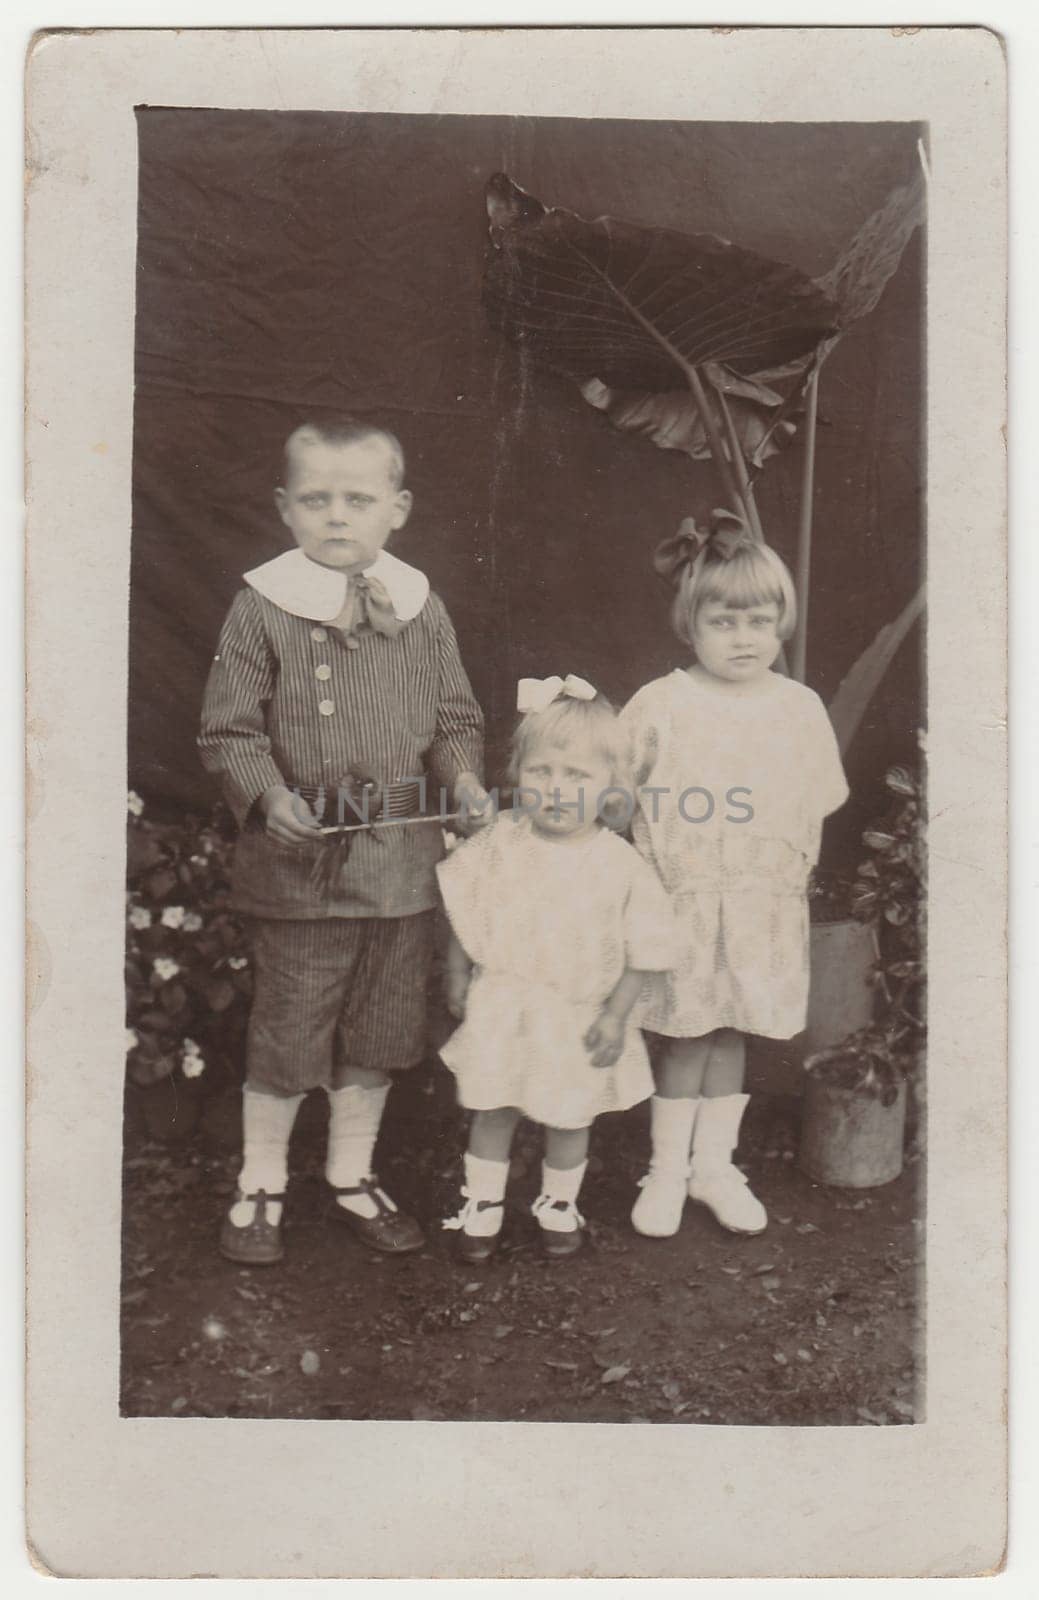 GERMANY - AUGUST, 1929: Vintage photo shows children (siblings) pose outdoors. Black white antique photo.